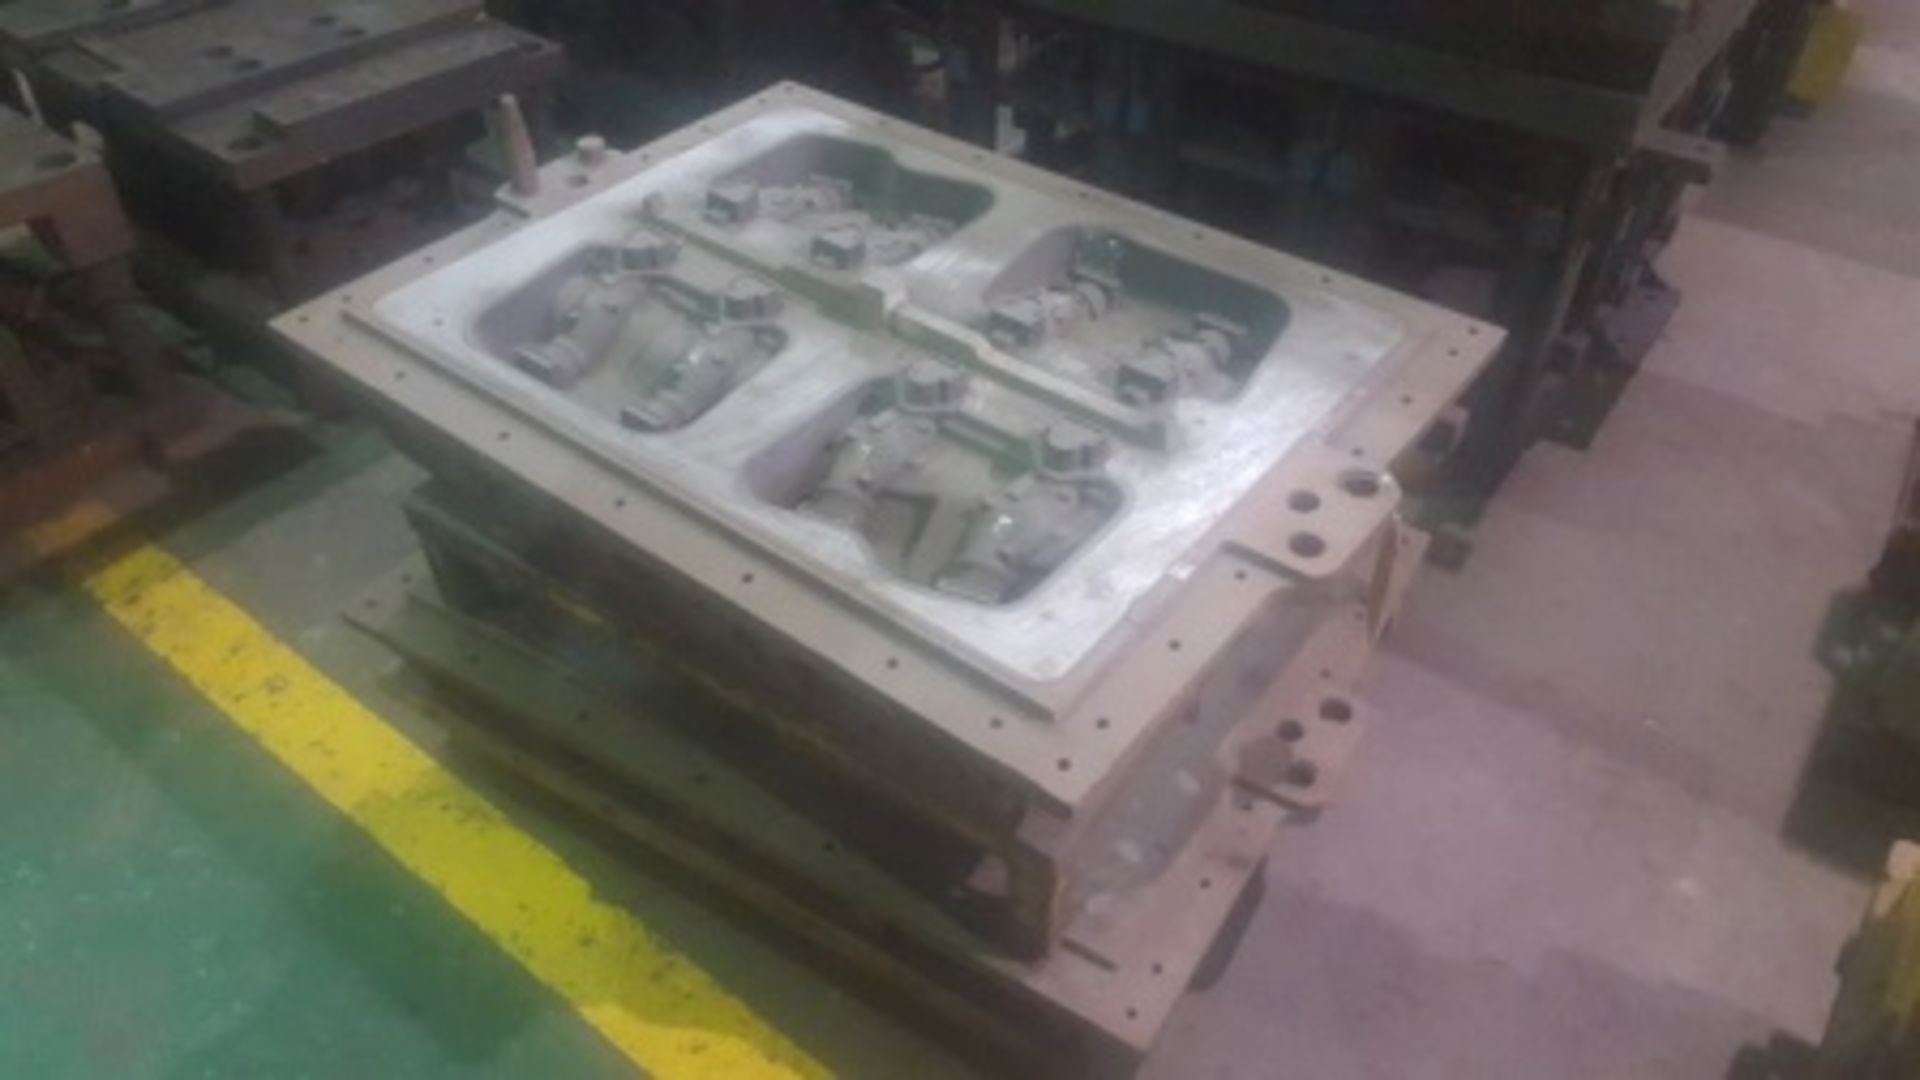 (7) Pallets of casting molds for aluminum intake manifolds for automotive engines